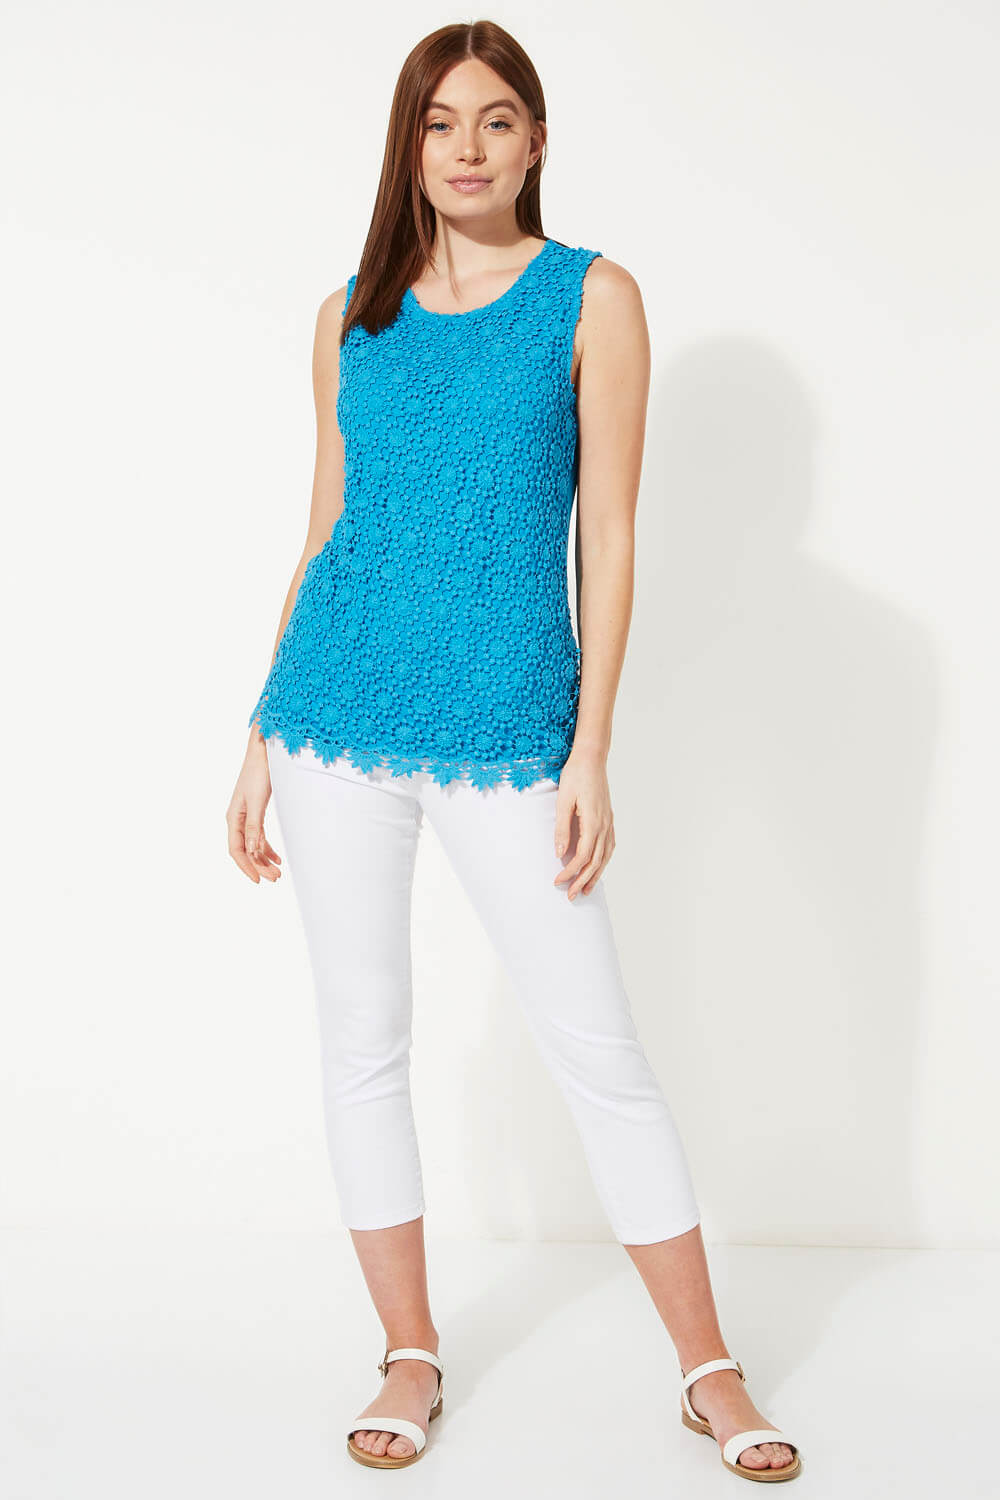 Turquoise Lace Front Shell Top, Image 2 of 5